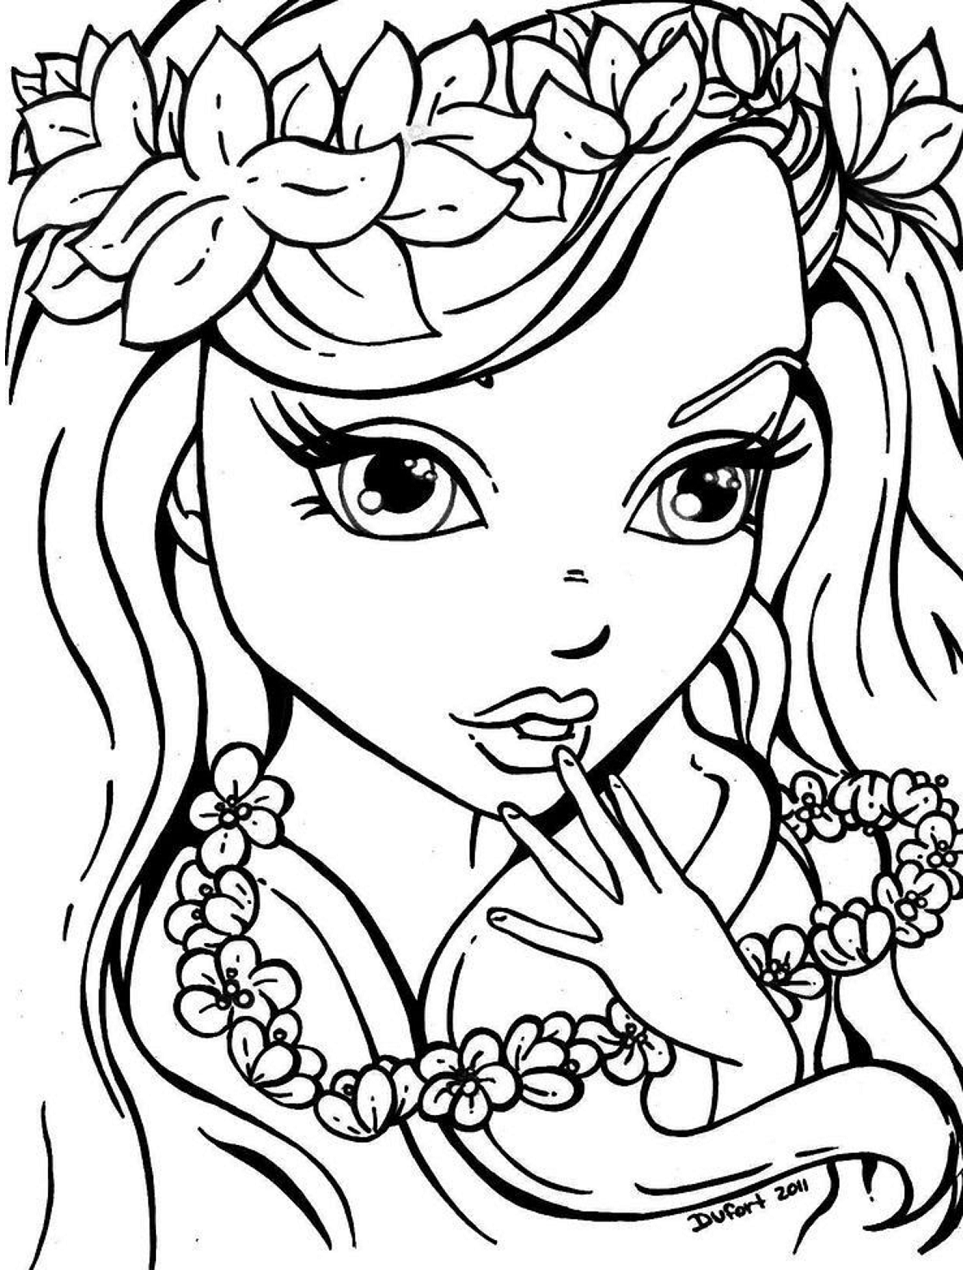 Girl Teenage Coloring Page Free Printable Coloring Pages For Kids